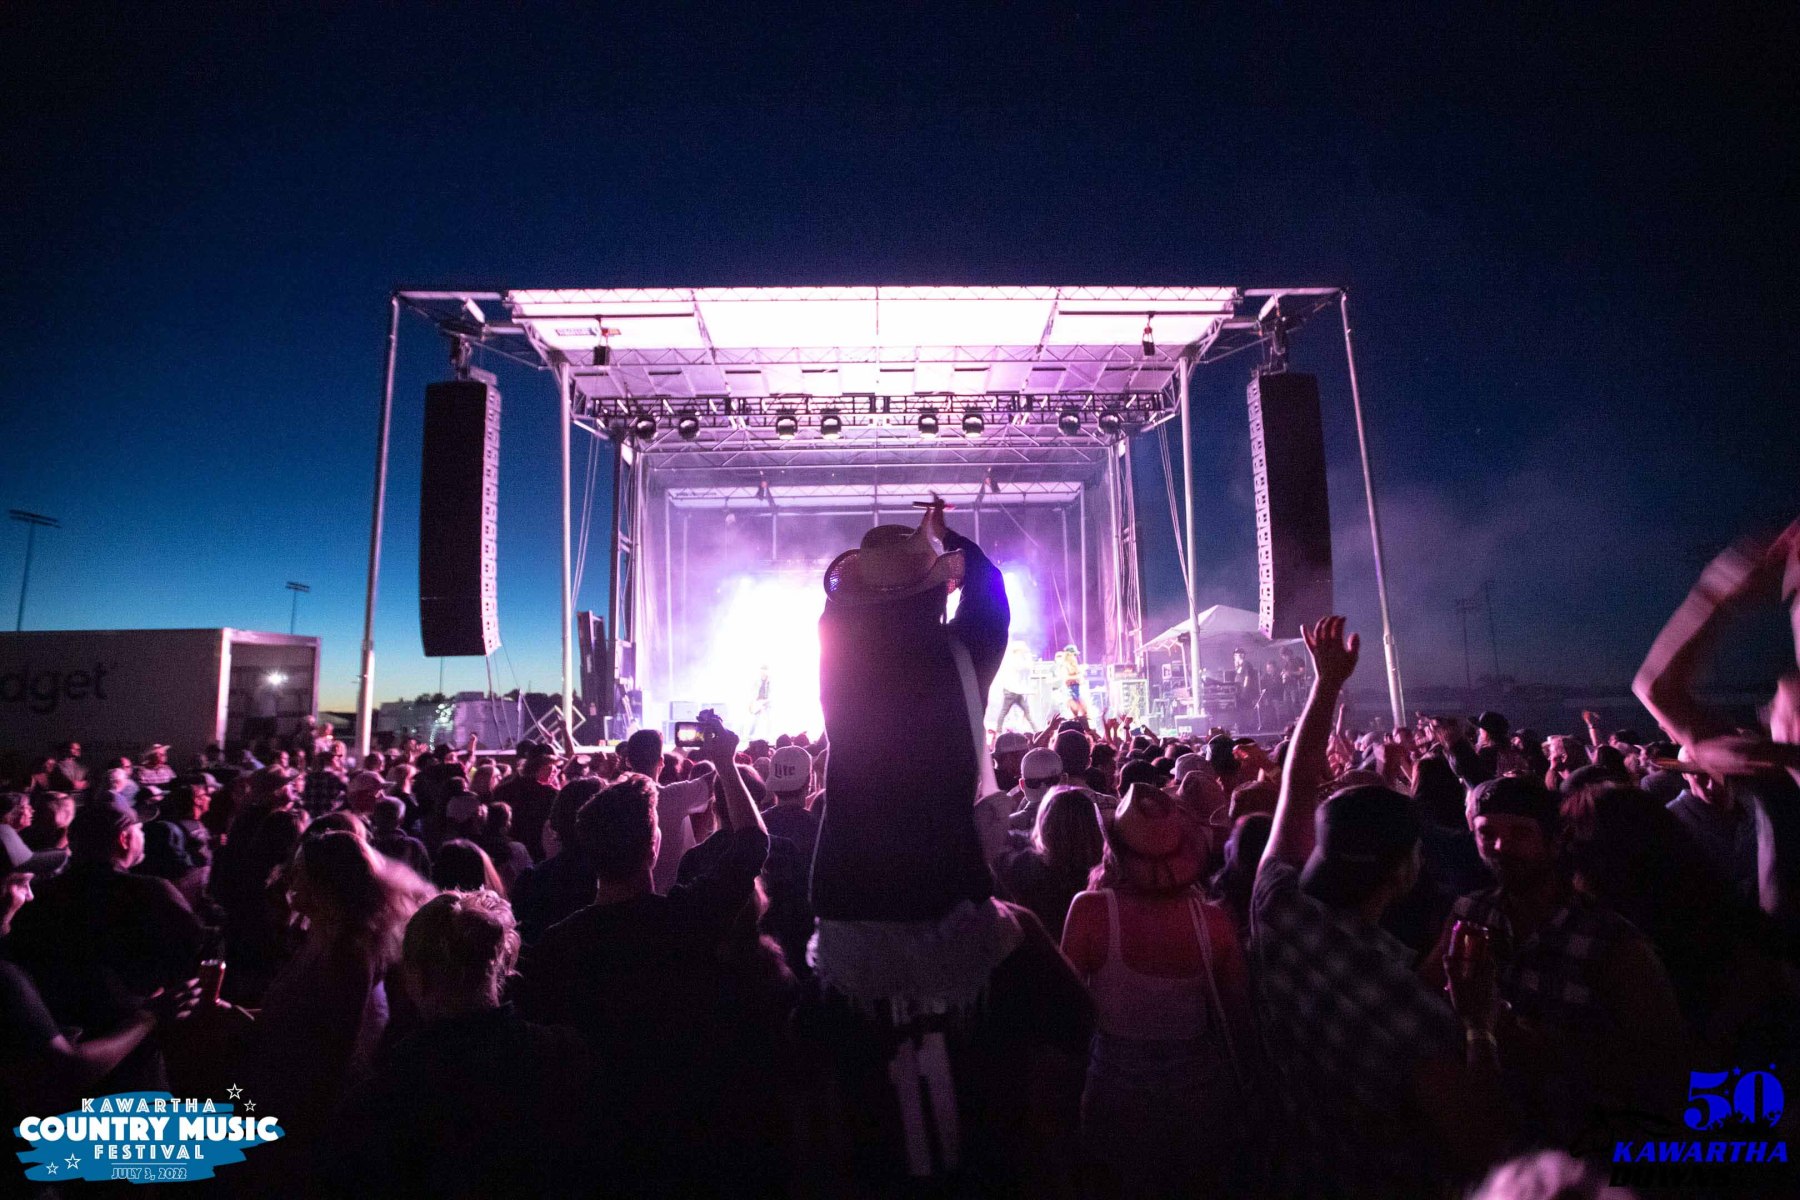 a photo of a crowd at an outdoor concert at night. featured in the center is a person propped up on someone's shoulders